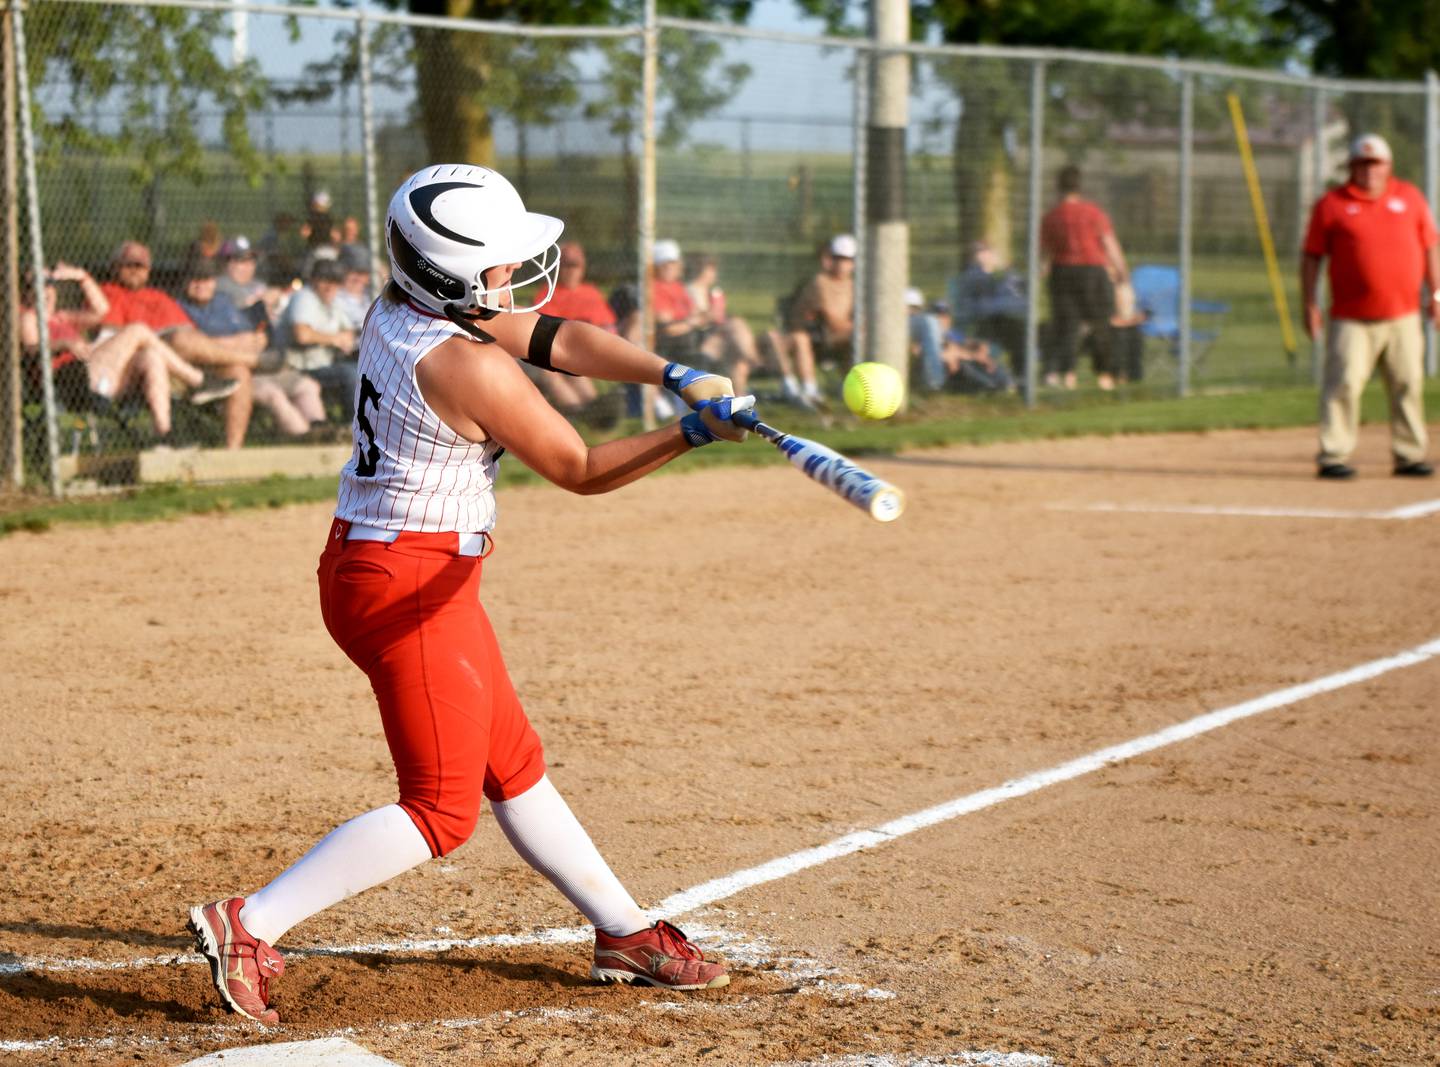 O-M senior Kasyn Shinn connects for a one-run double Wednesday in their regional opener against Stanton. The Bulldogs won 11-1 in five innings.